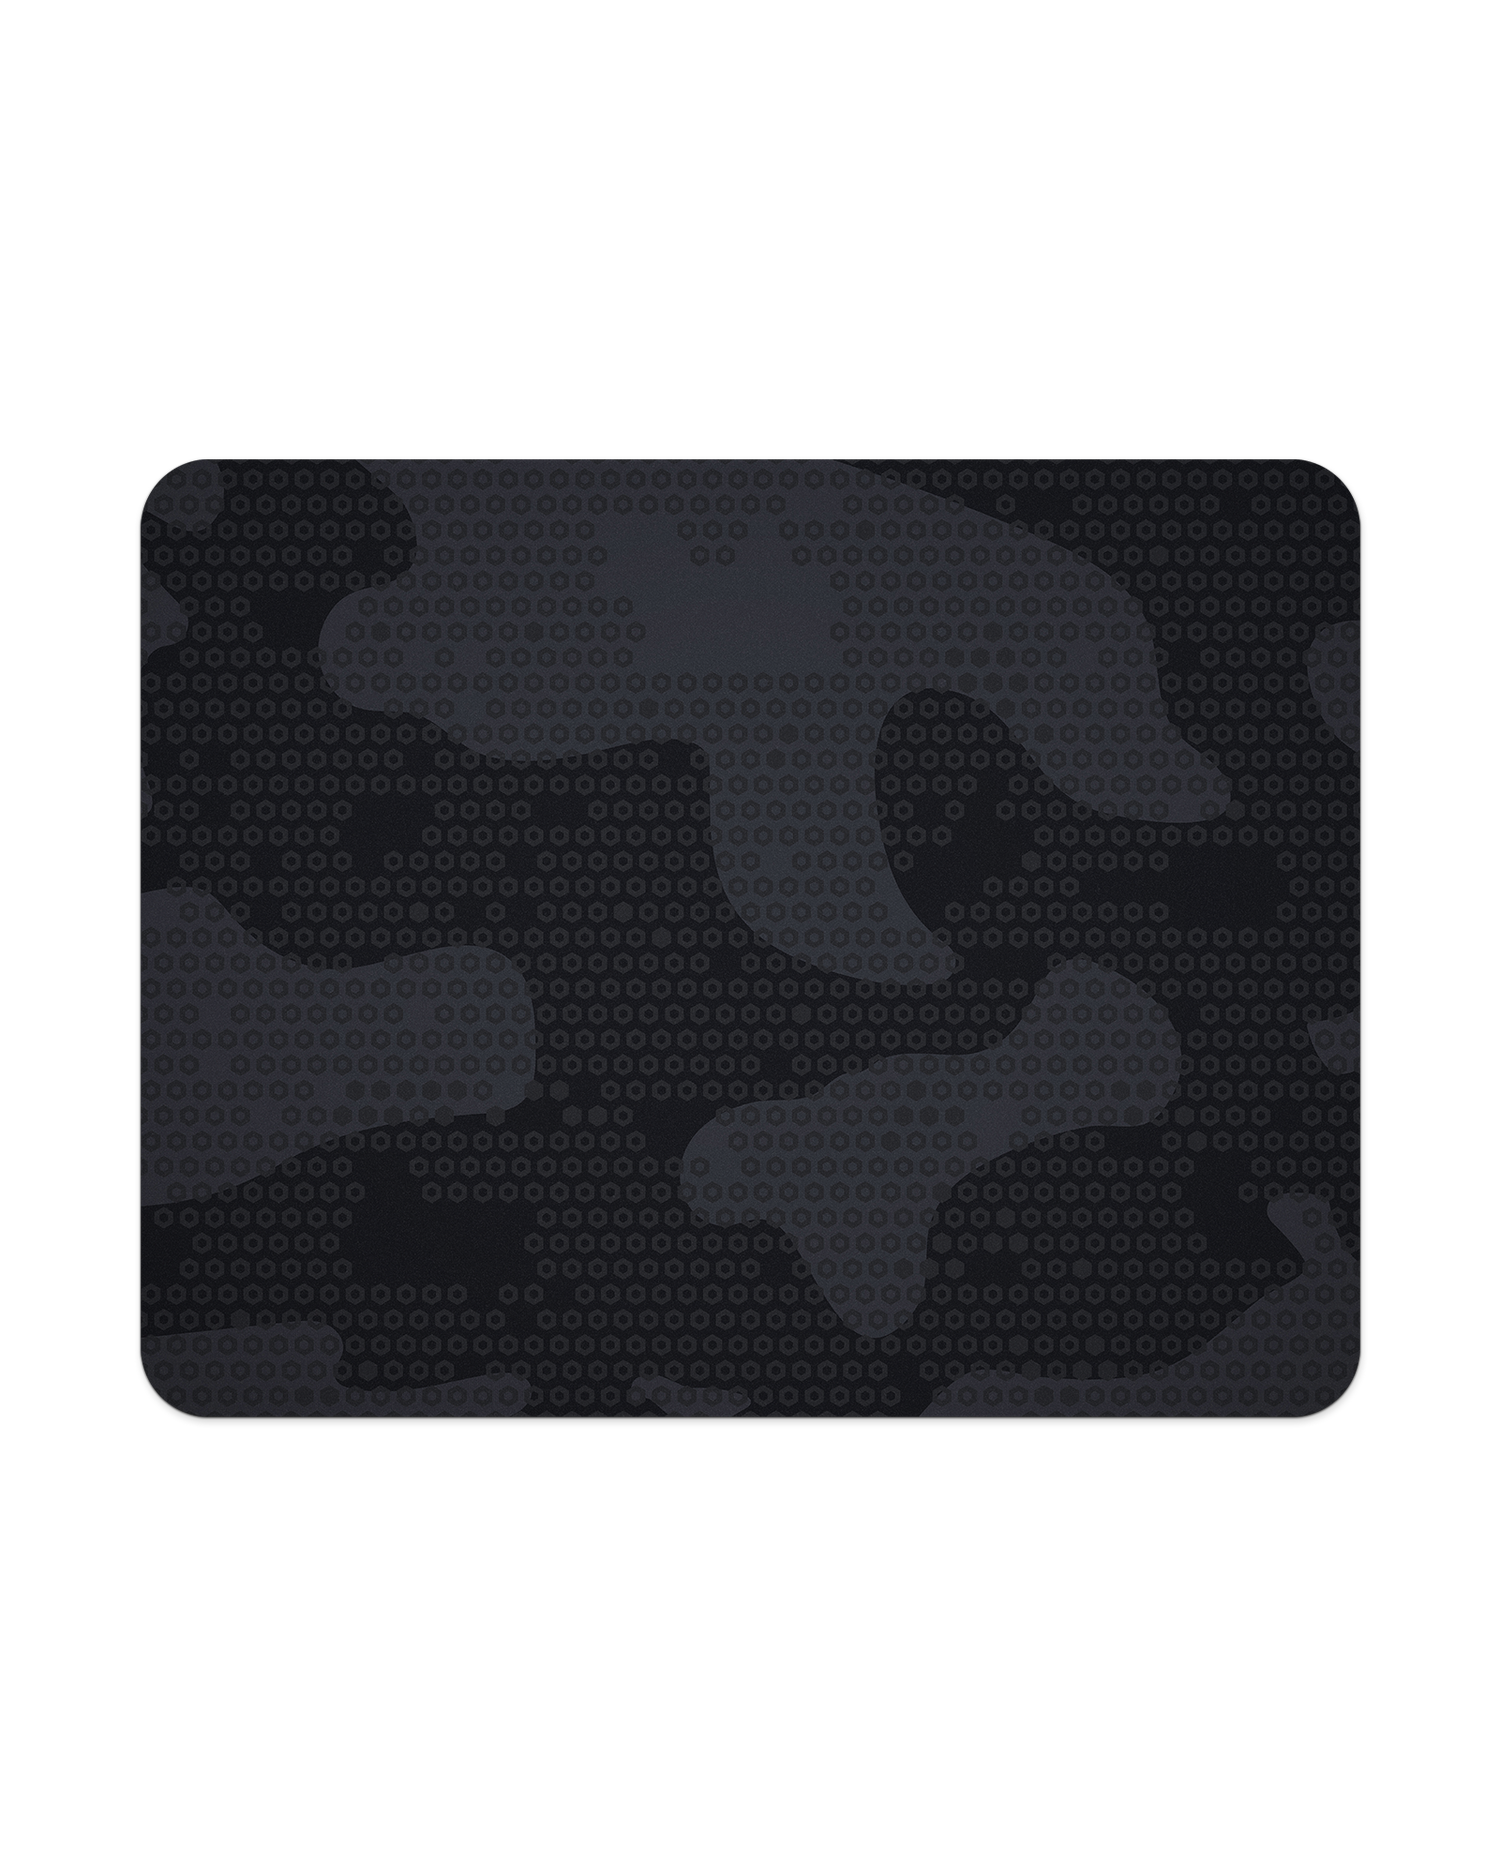 Spec Ops Dark Mouse Pad from Top